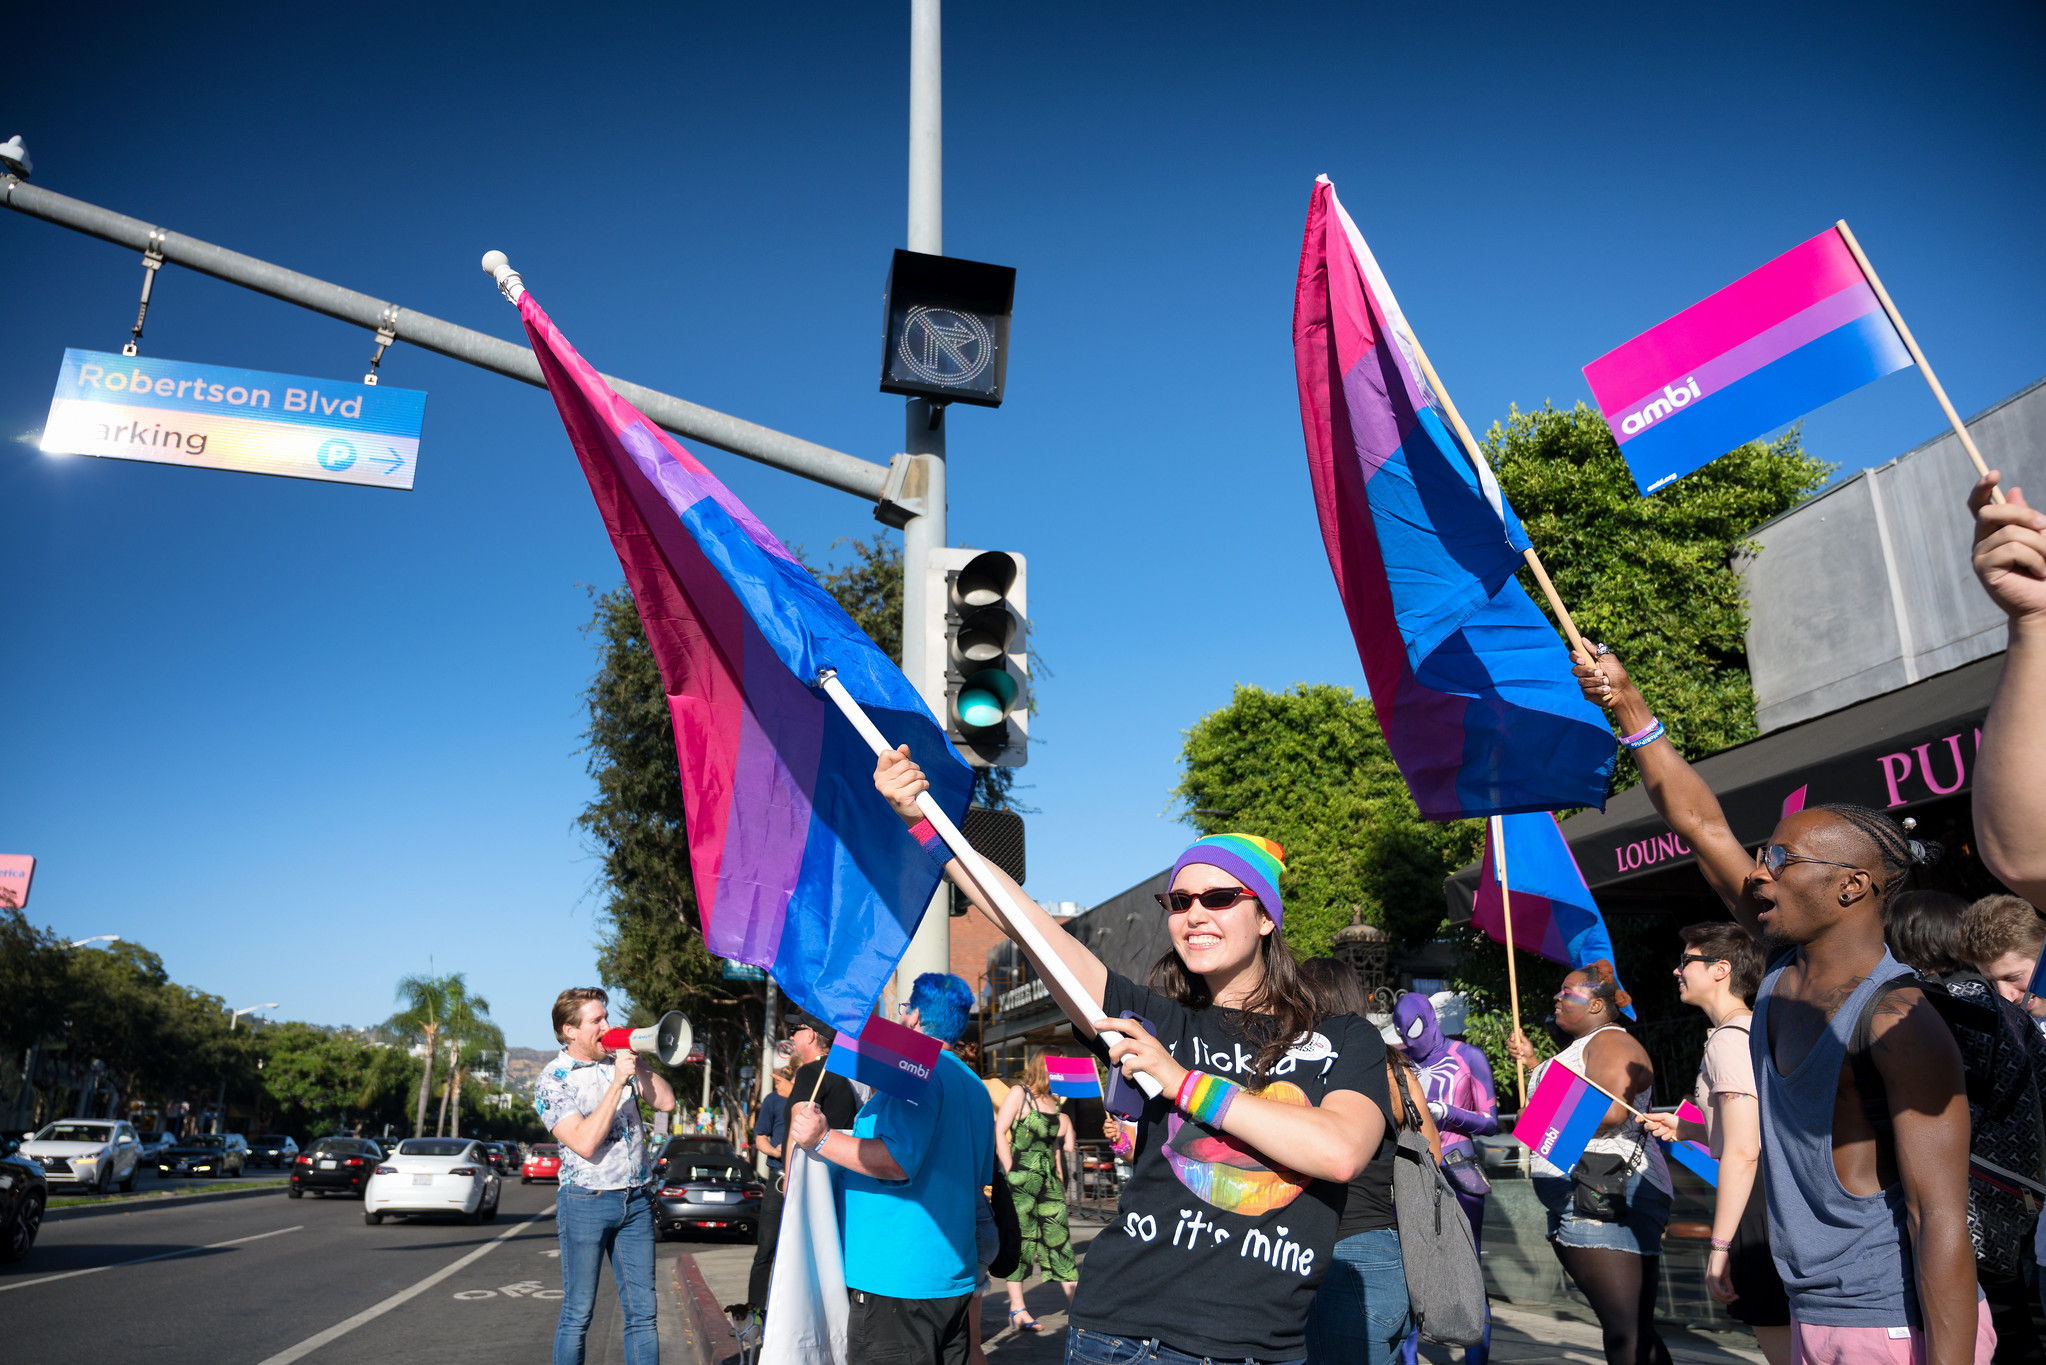 People on the sidewalk smiling wearing pride shirts and holding purple bi flags.